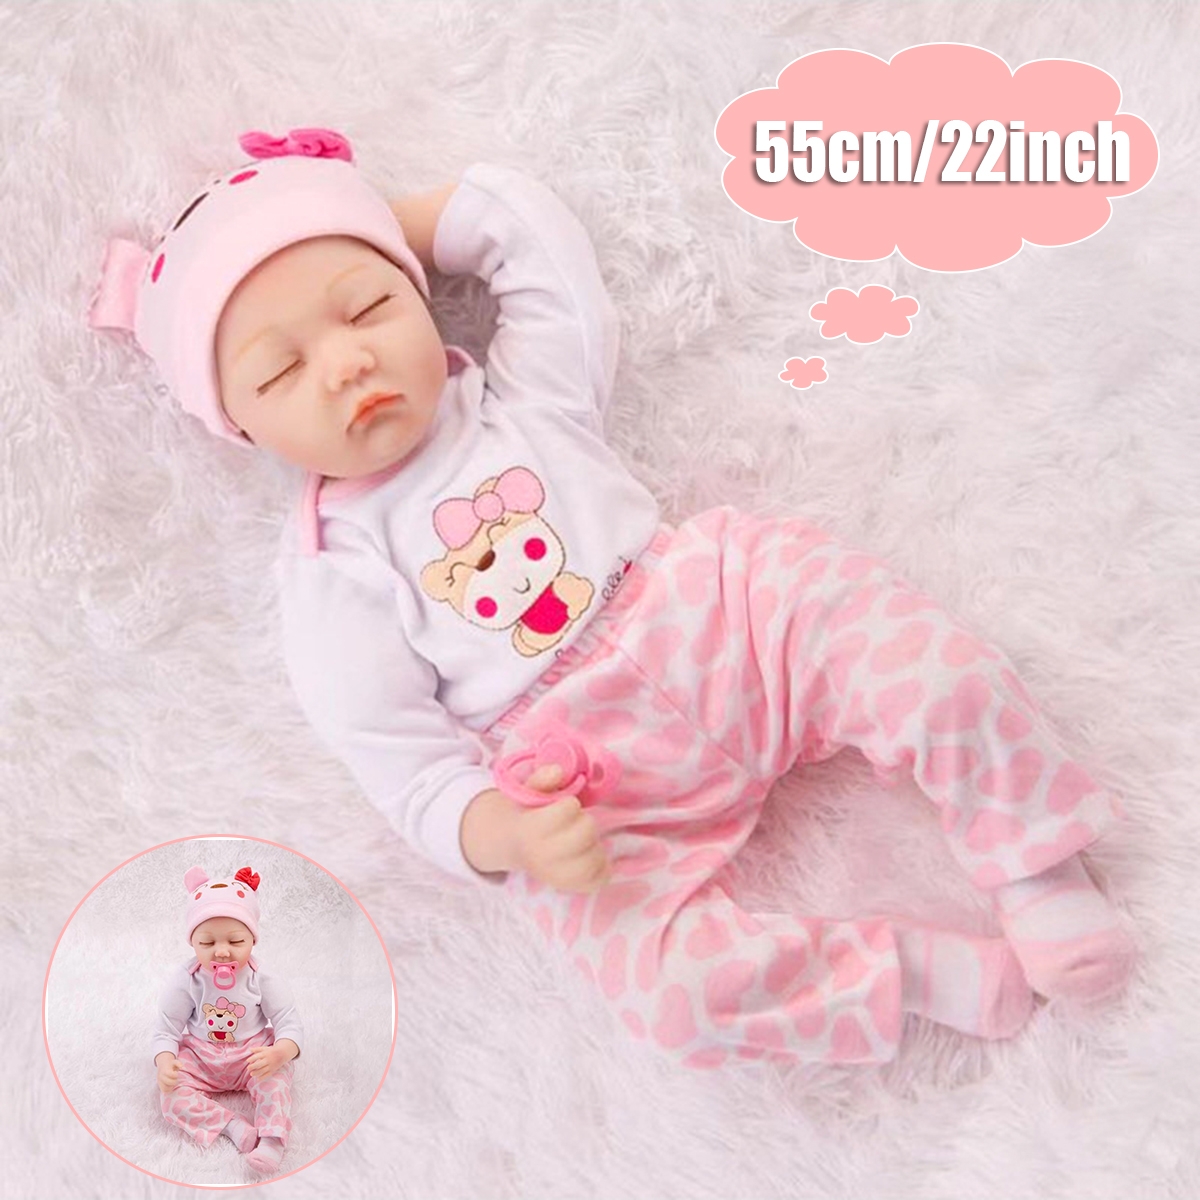 55CM Handmade Soft Silicone Realistic Cute Reborn Baby Doll for Kids Xmas Gift